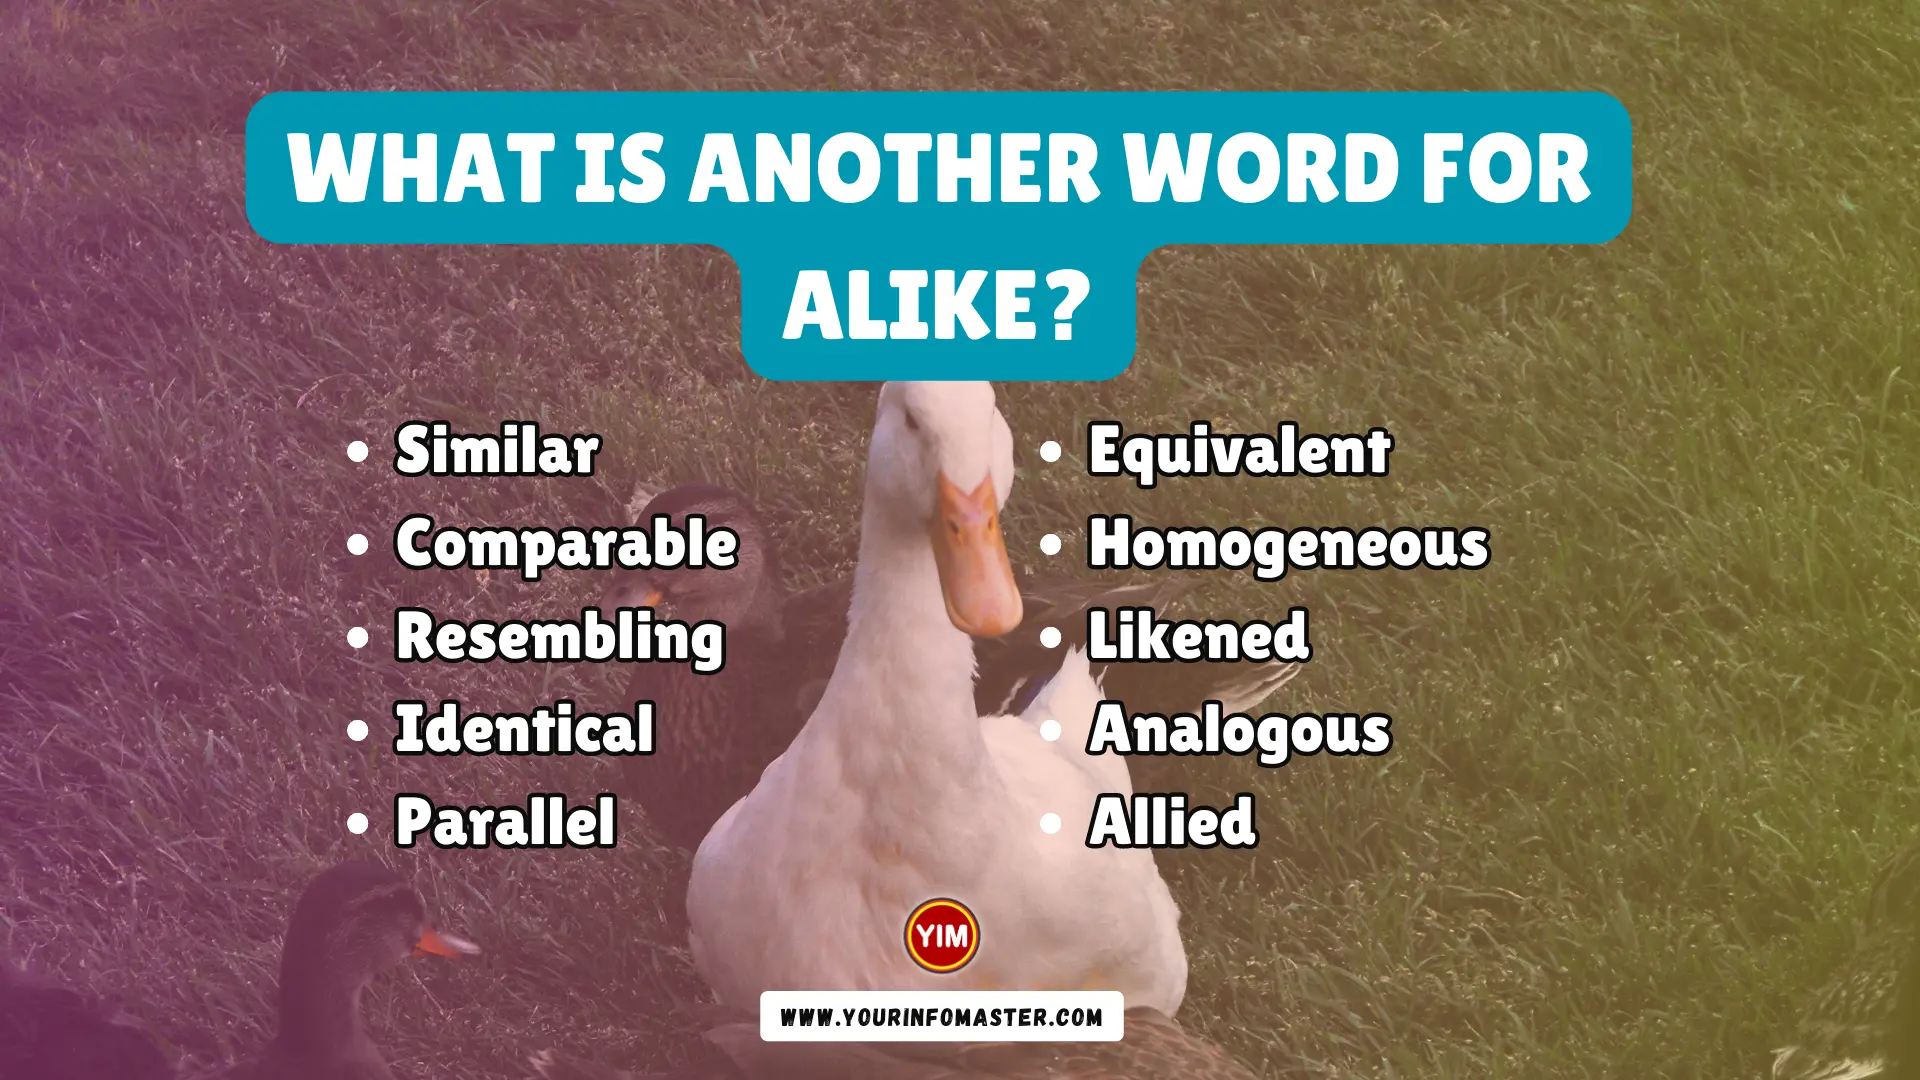 What is another word for Alike